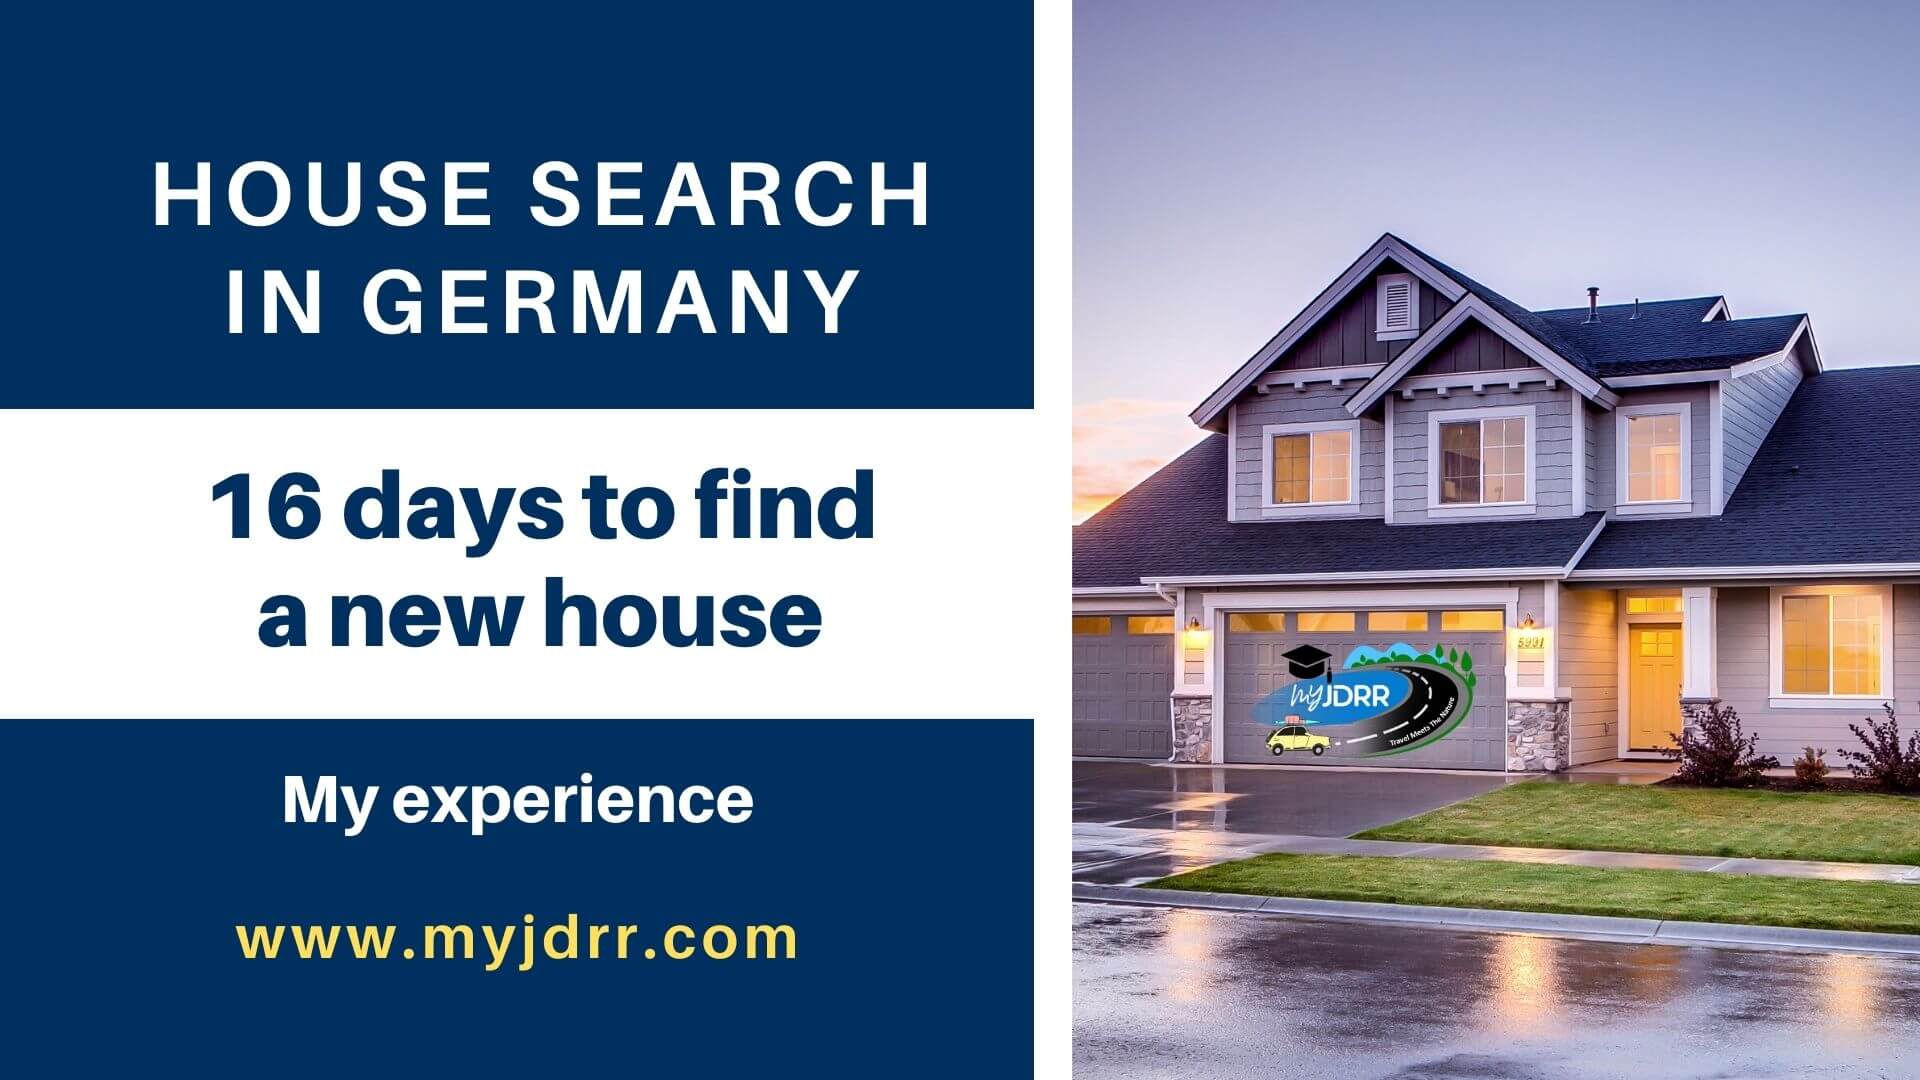 House search in Germany